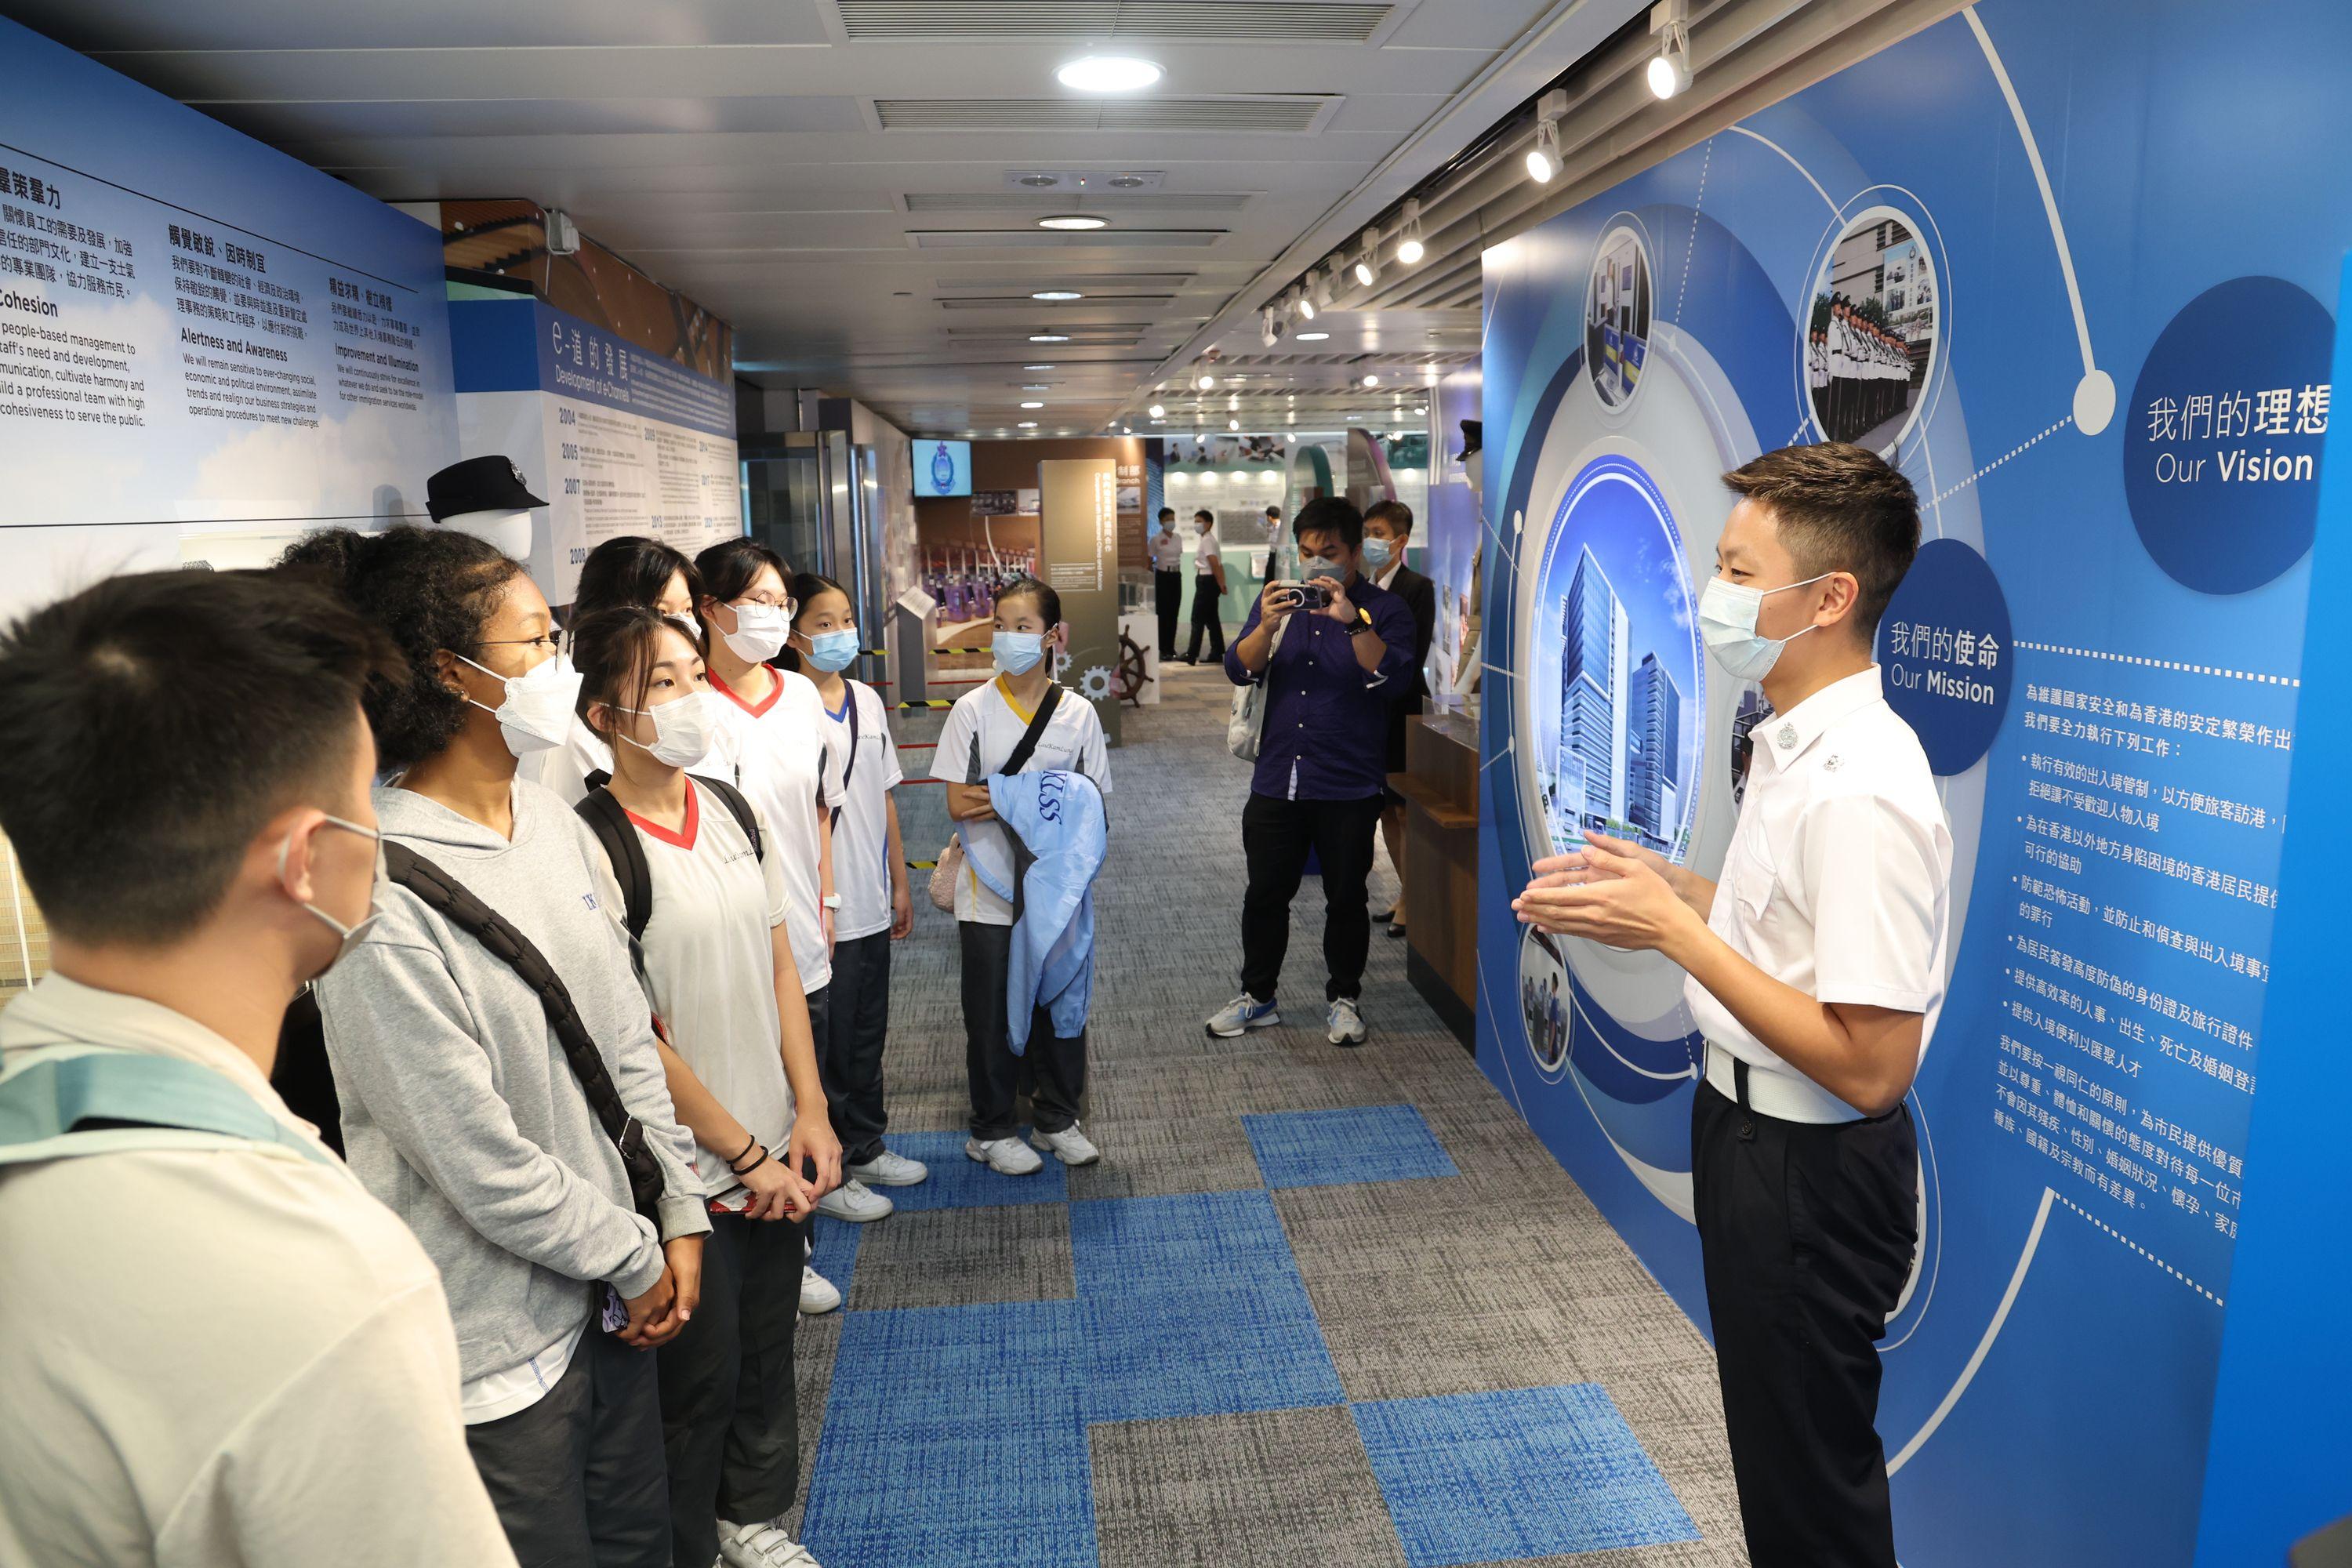 The Immigration Service Institute of Training and Development held an Open Day today (October 29). Photo shows a group of secondary school students touring the Training Gallery of the Immigration Service Institute of Training and Development.